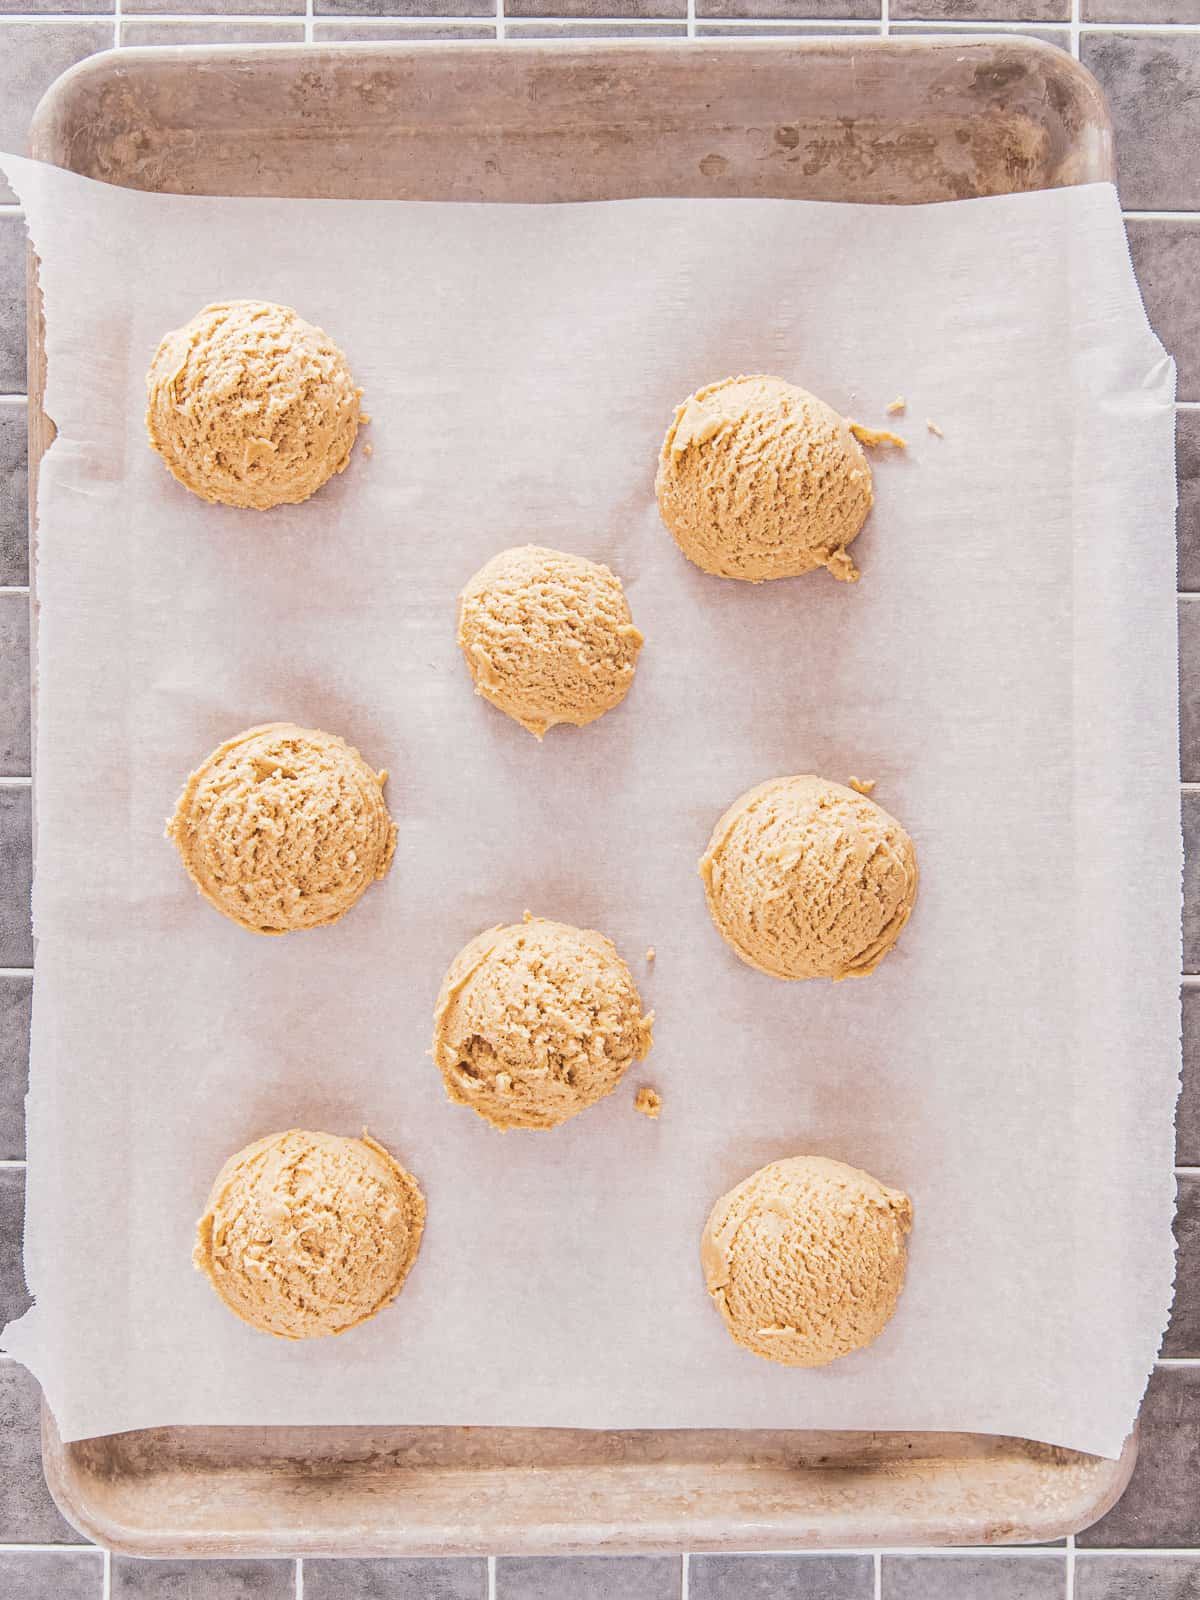 8 cookie dough balls on a parchment lined baking sheet.